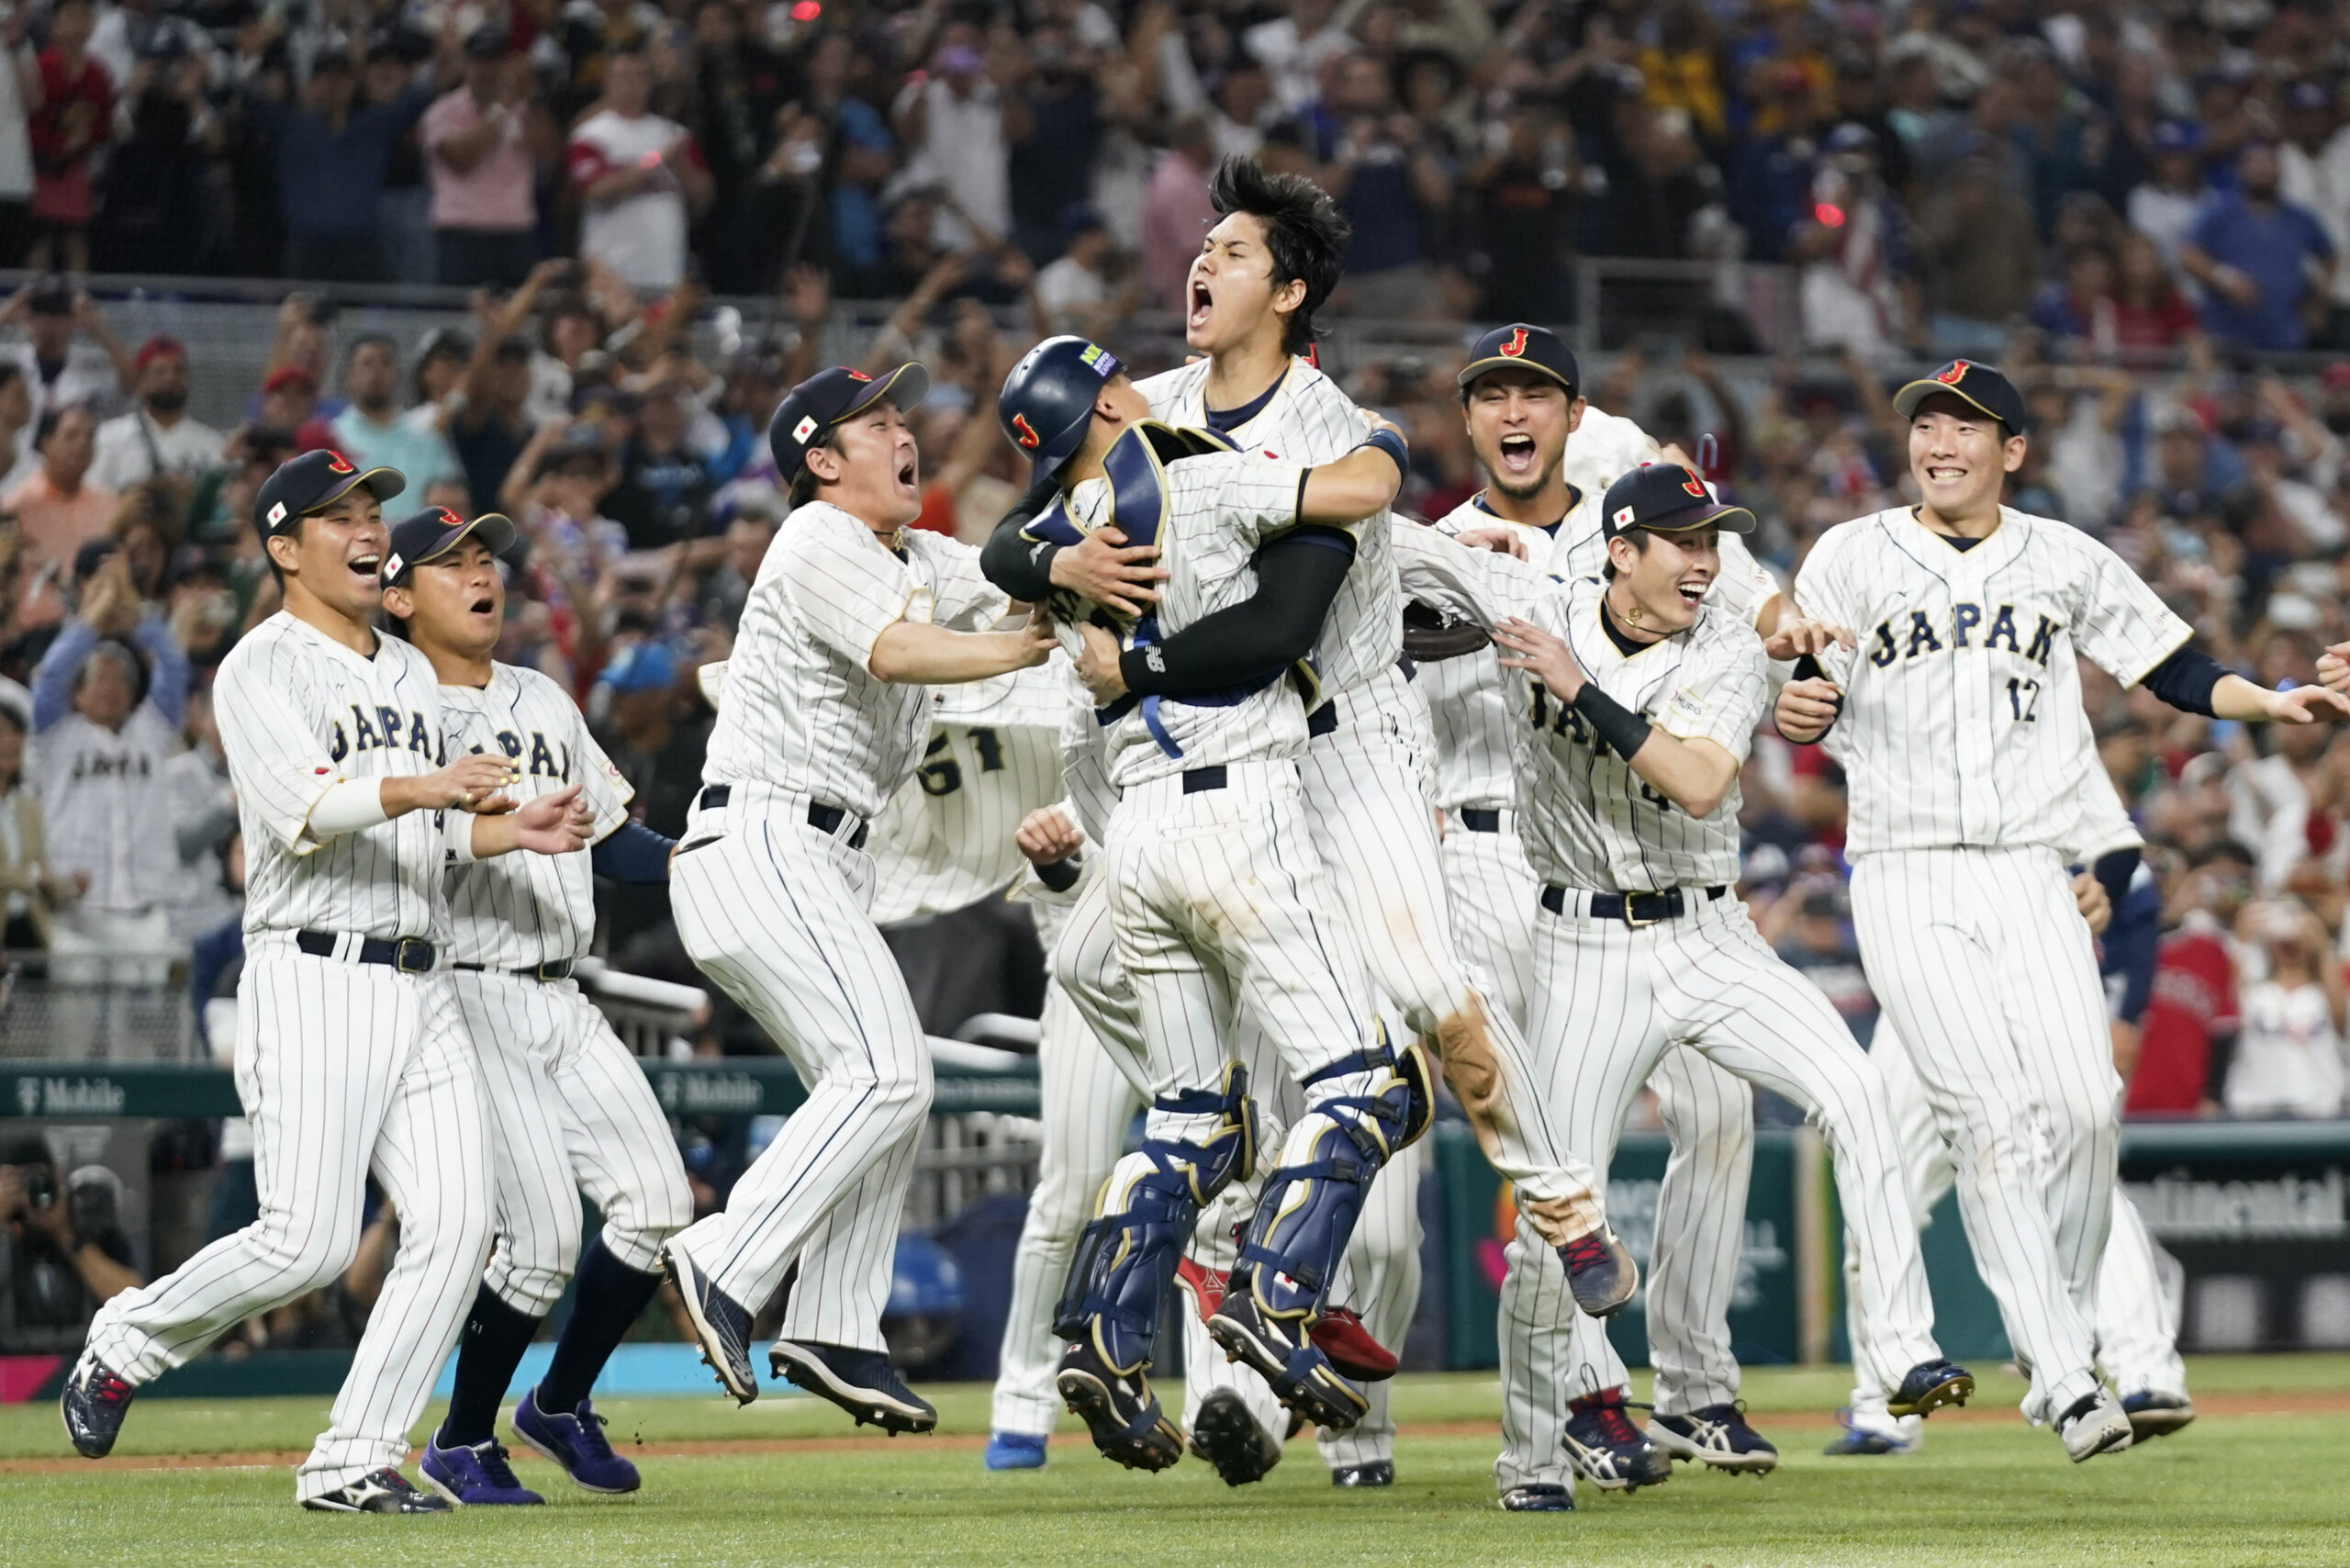 Shohei Ohtani, Mike Trout provide perfect ending for WBC thriller